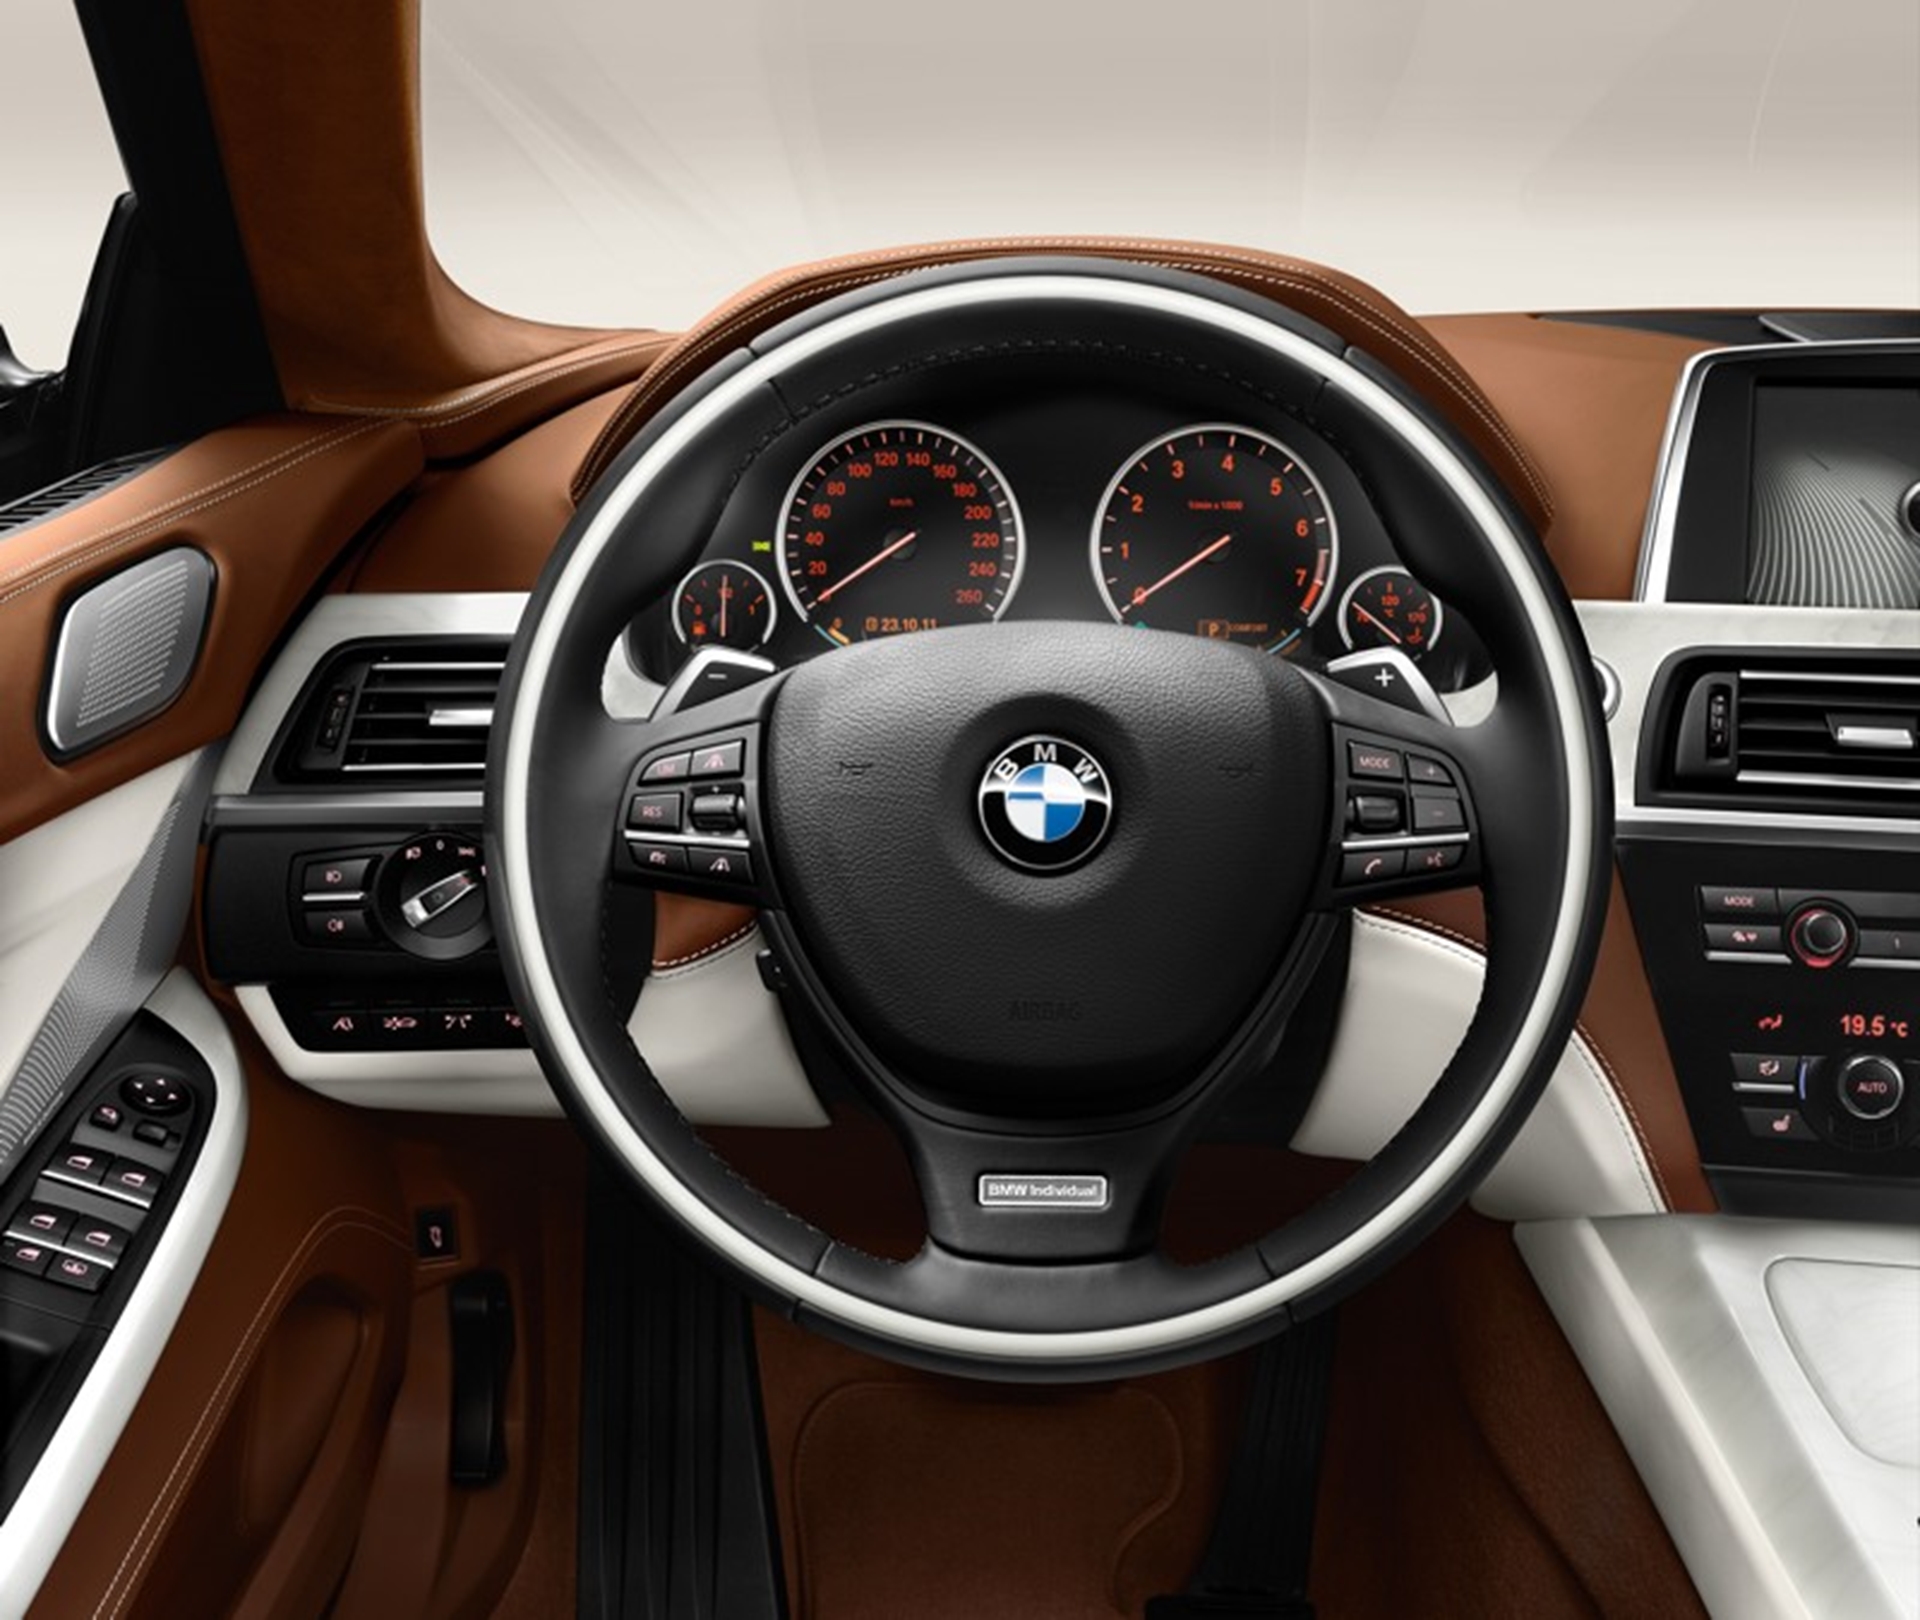 BMW 6 Series Gran Coupe Interior with BMW’s traditional driver-oriented cockpit